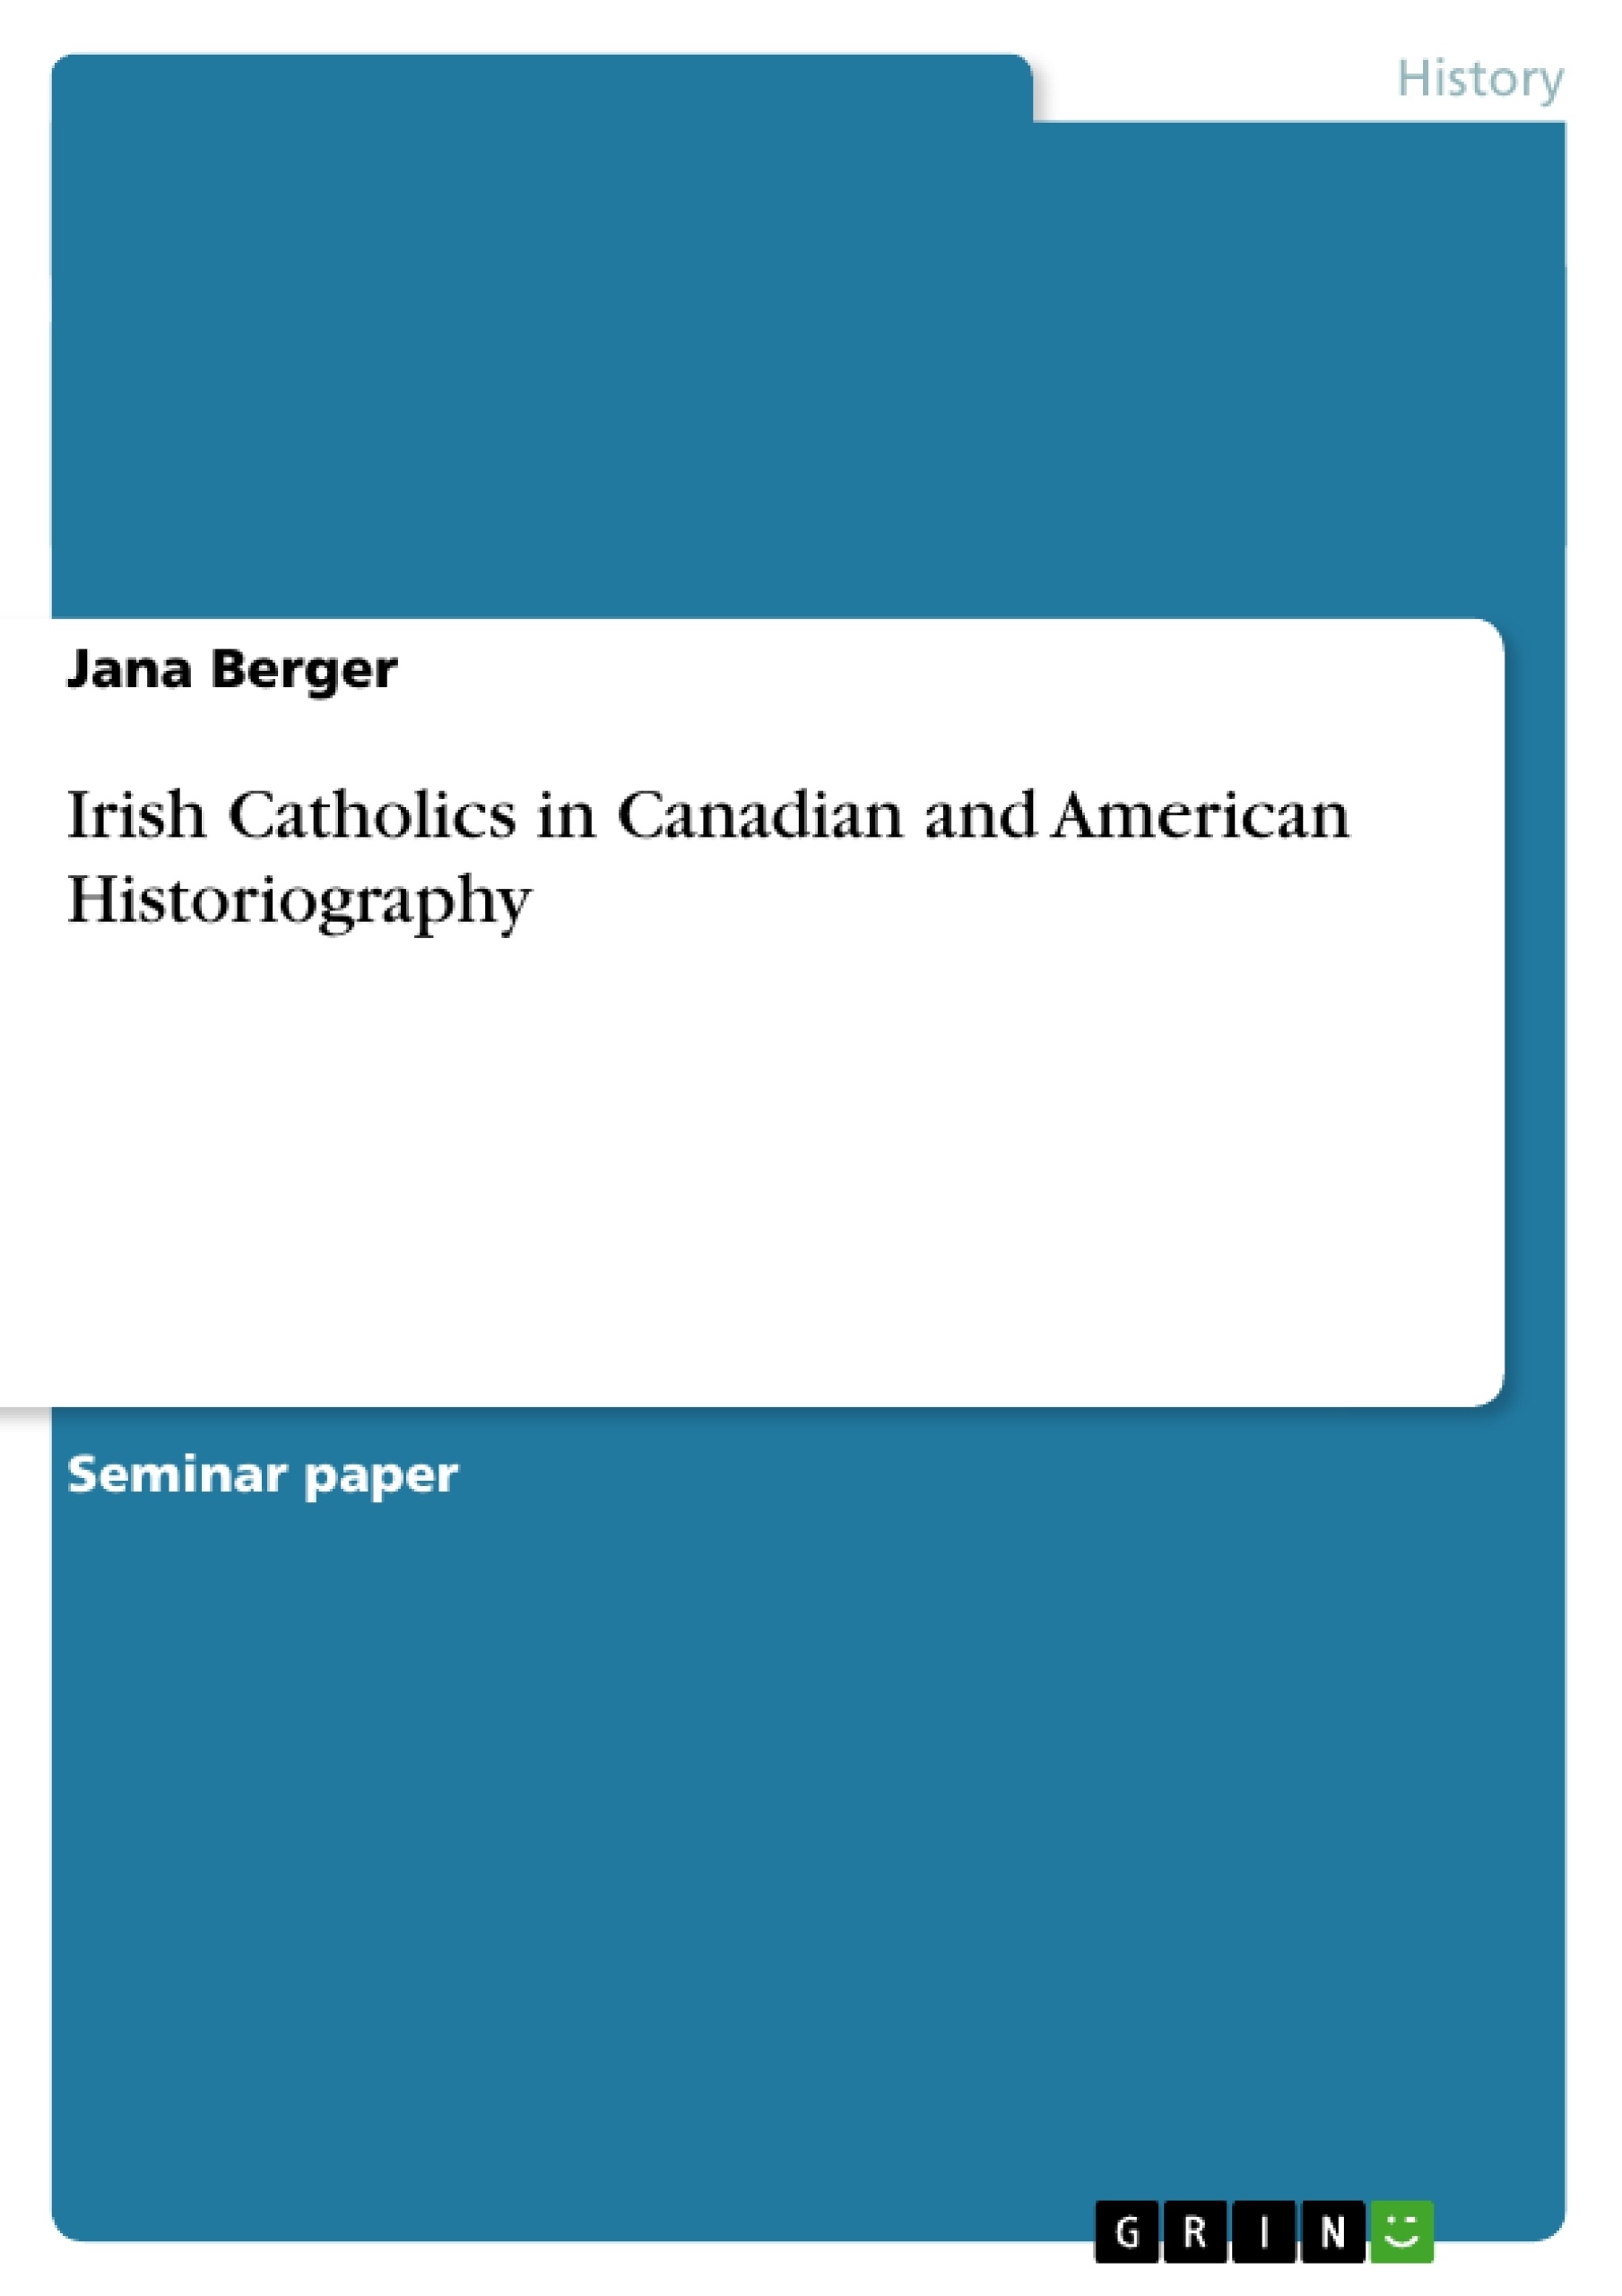 Title: Irish Catholics in Canadian and American Historiography